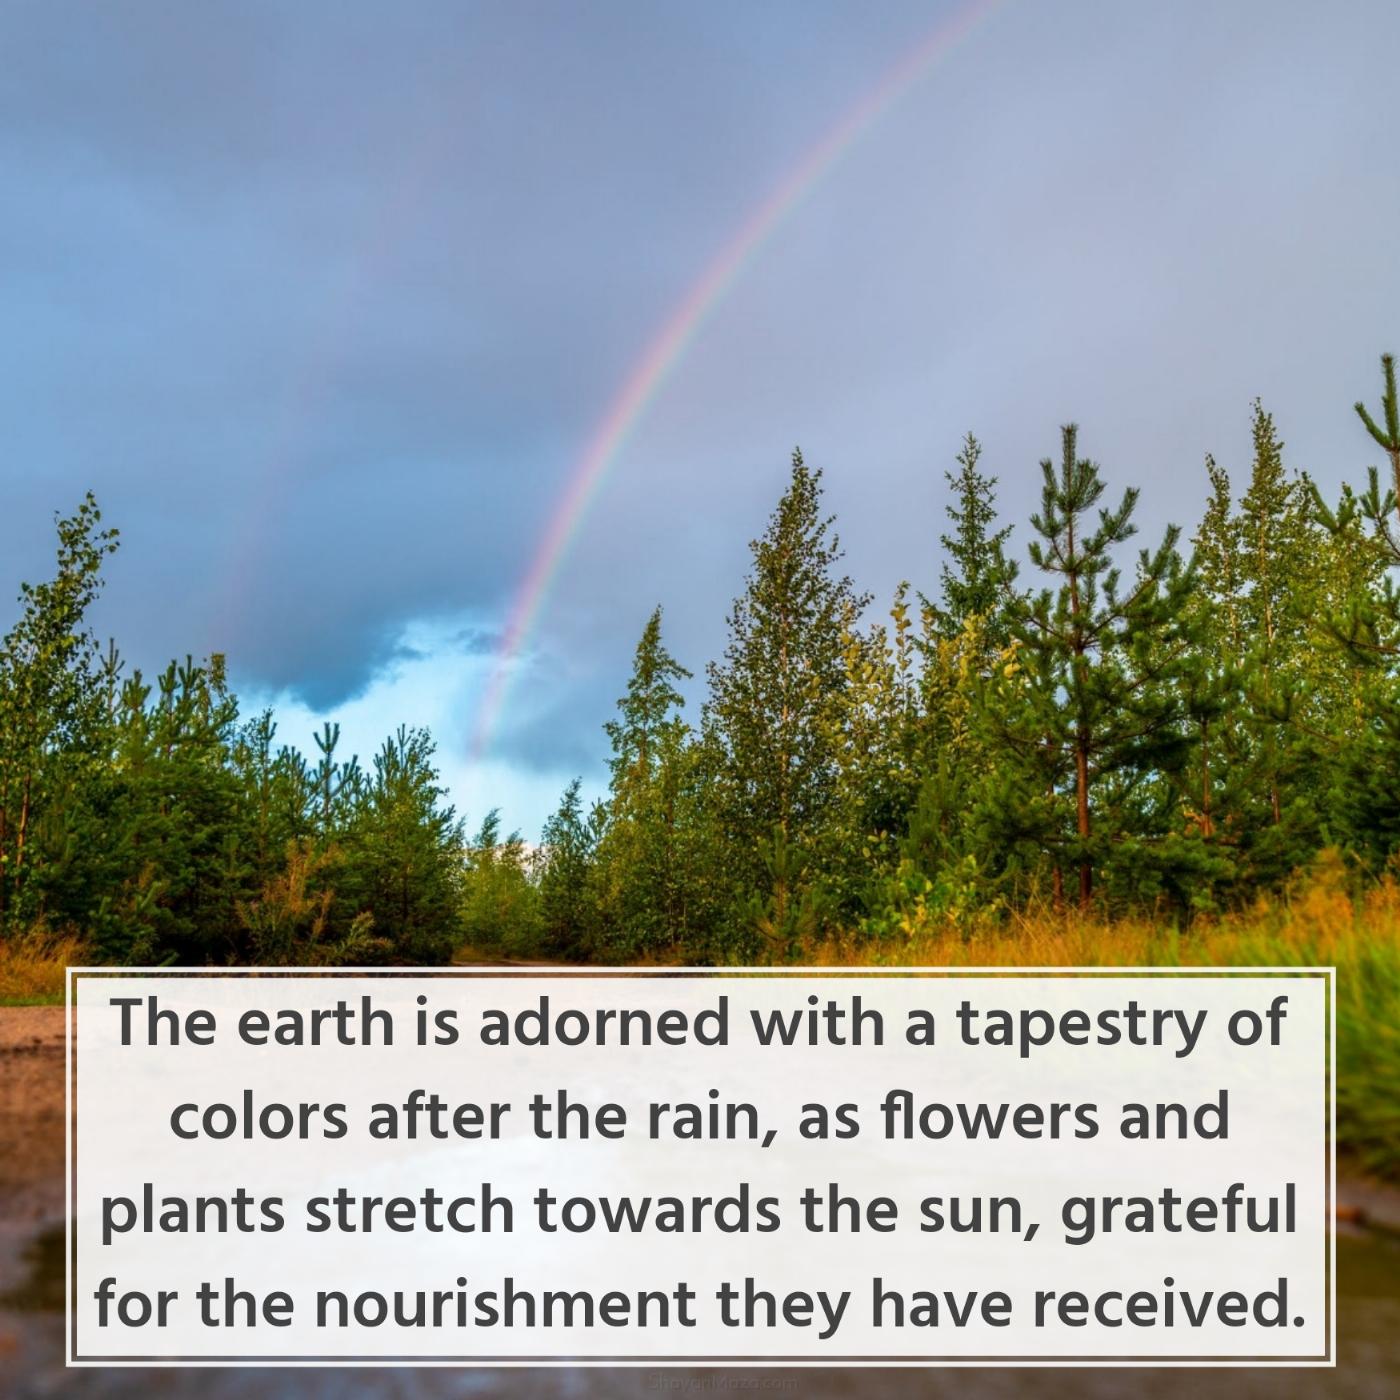 The earth is adorned with a tapestry of colors after the rain